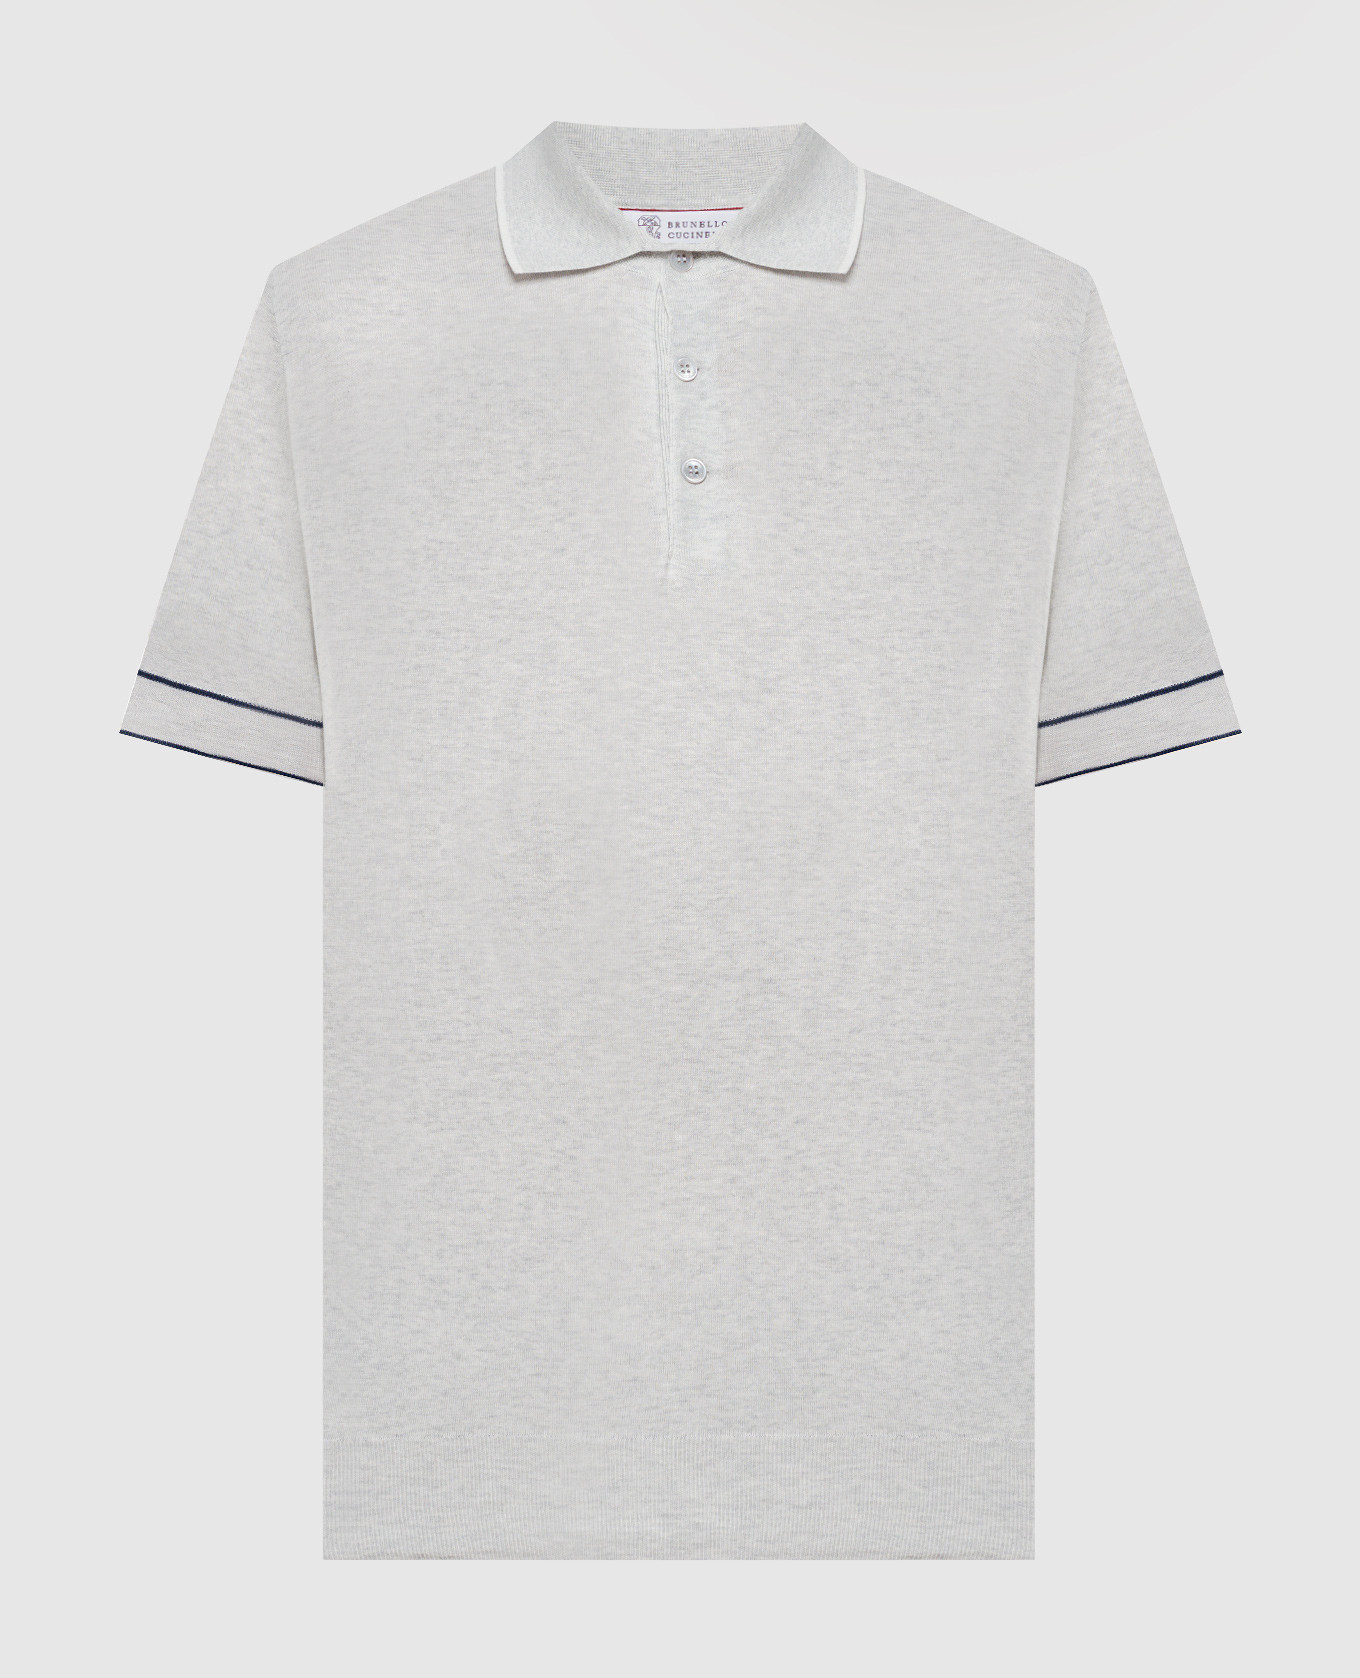 Gray melange polo shirt with contrasting edging